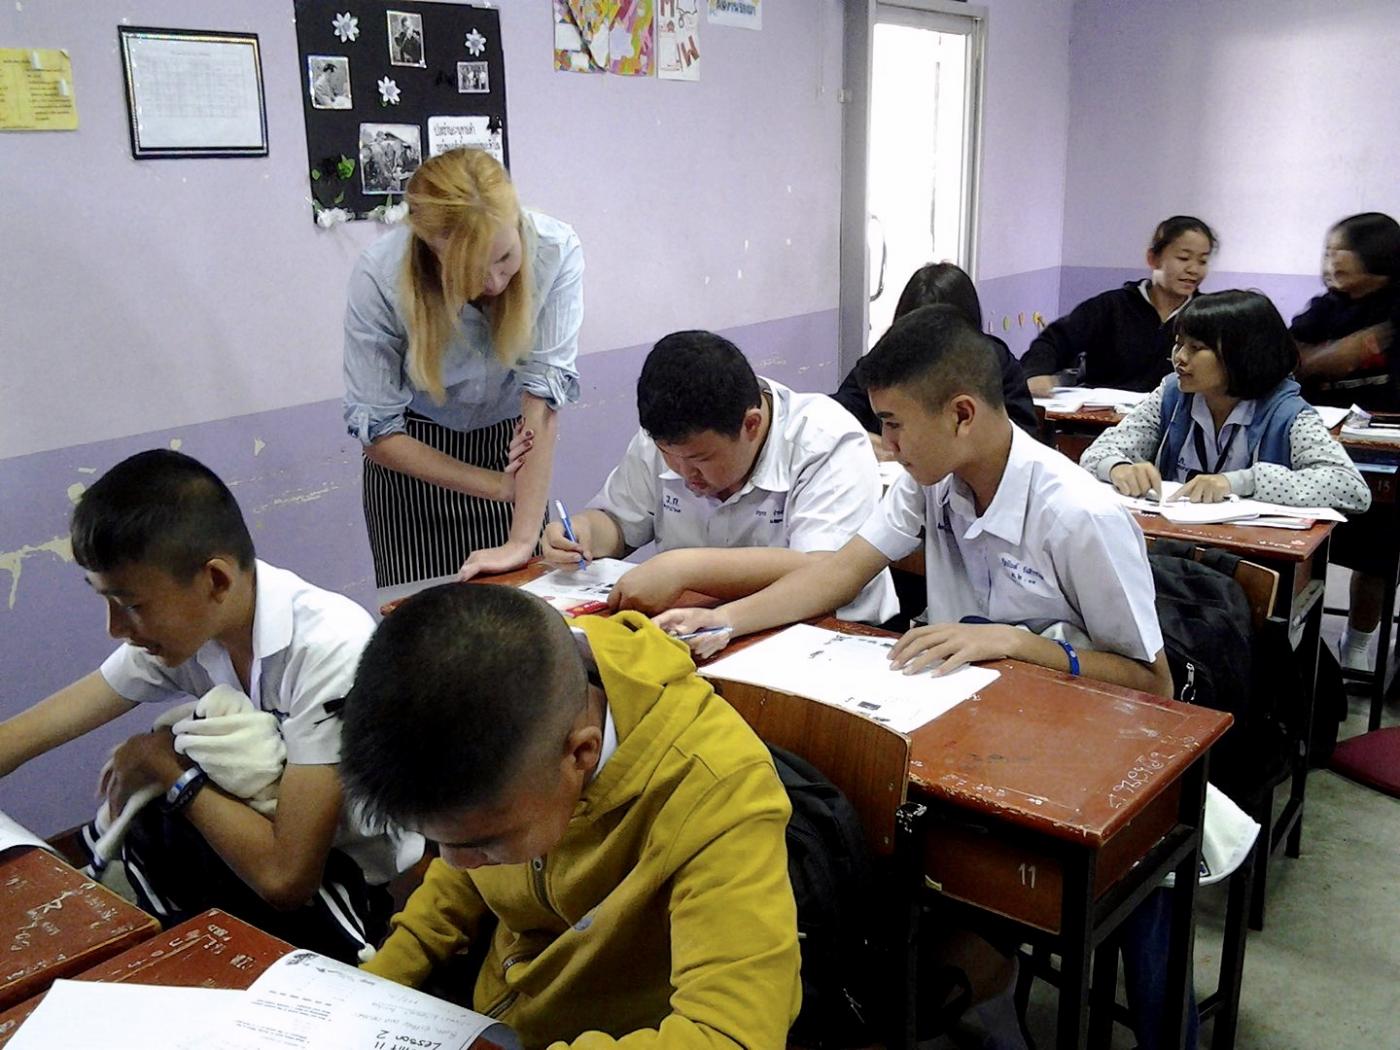 The Top 7 Asian Countries to Teach English